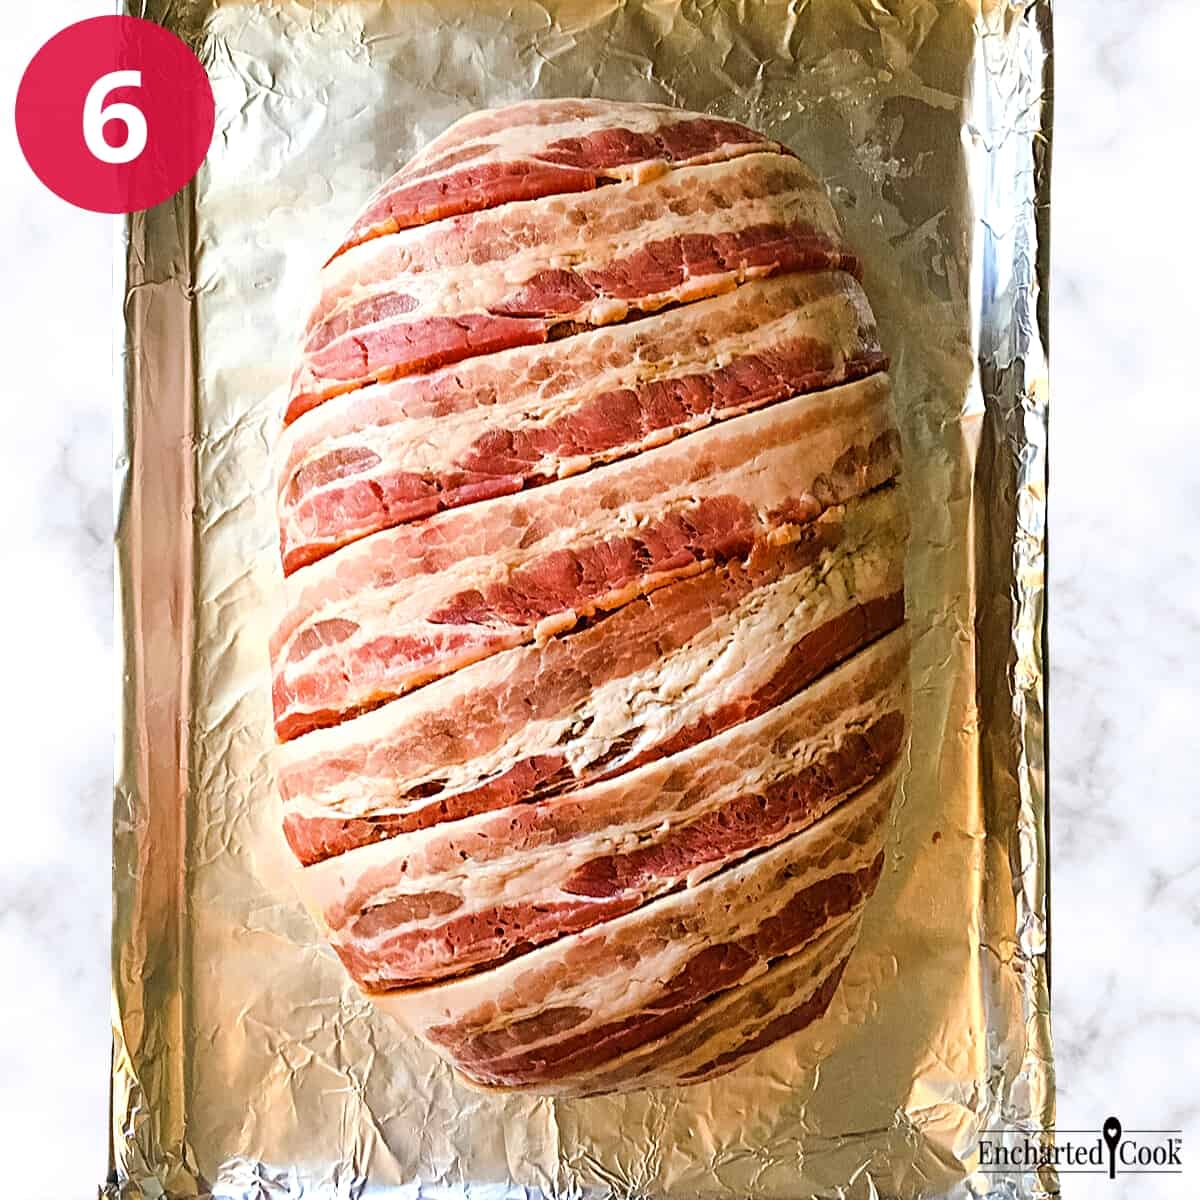 Process Photo 6 - The meatloaf mixture has been shaped into an oval log and covered in strips of bacon.